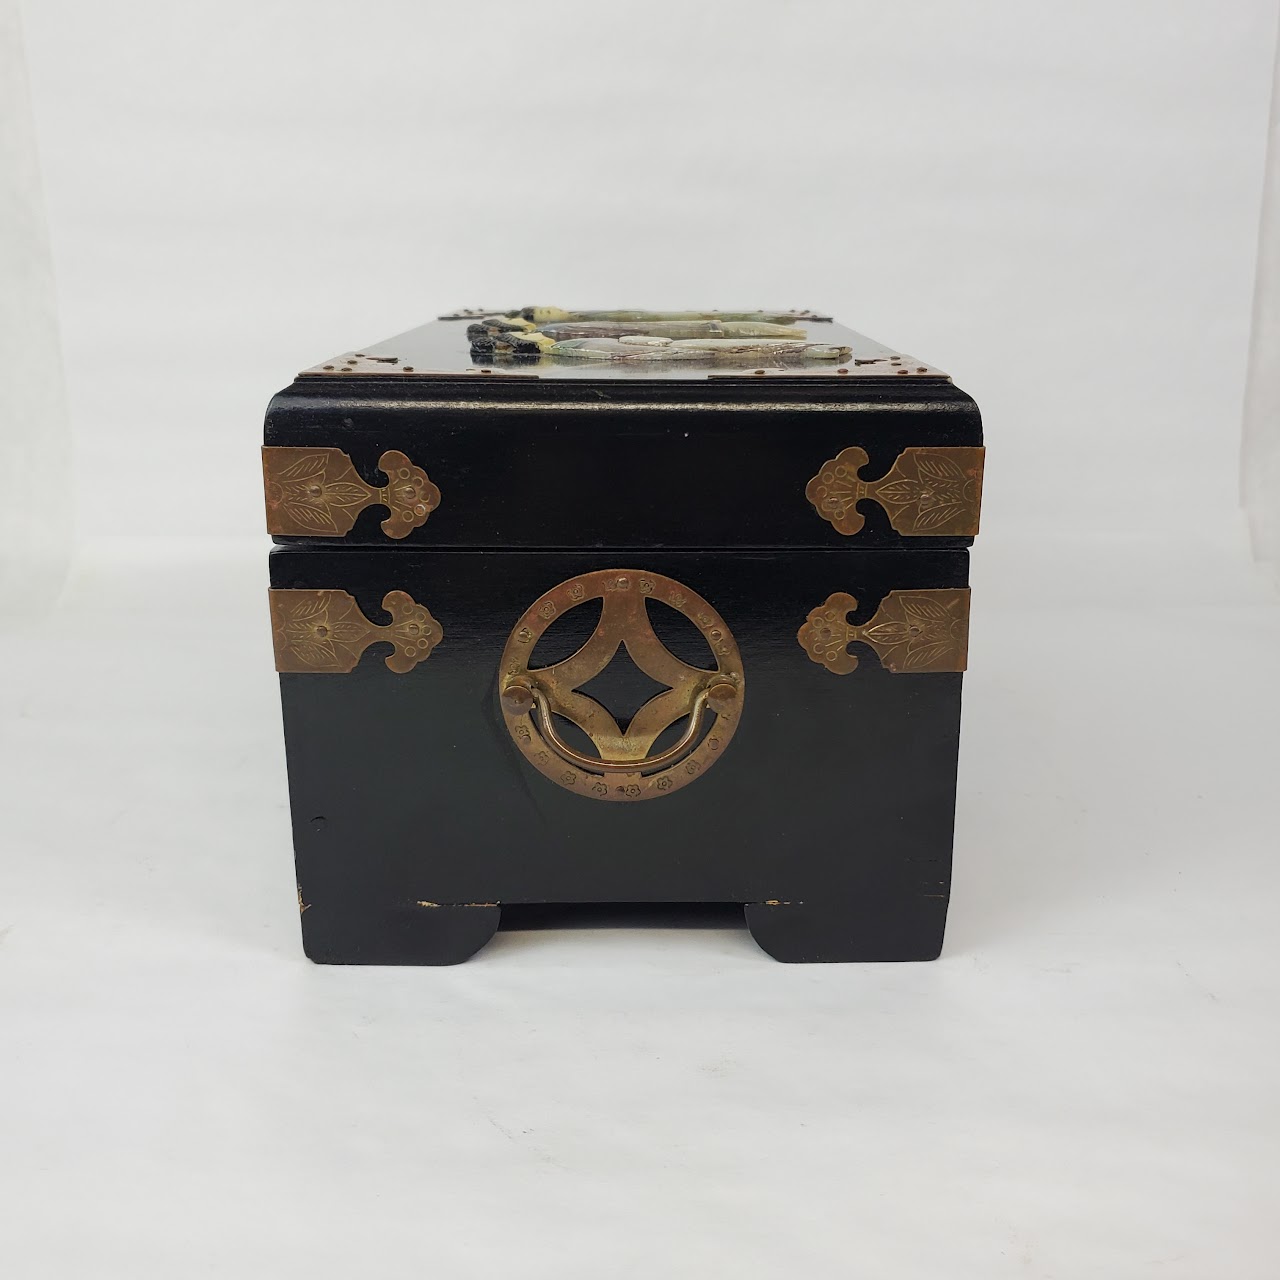 Chinese Black Lacquer and Cut Stone Jewelry Box